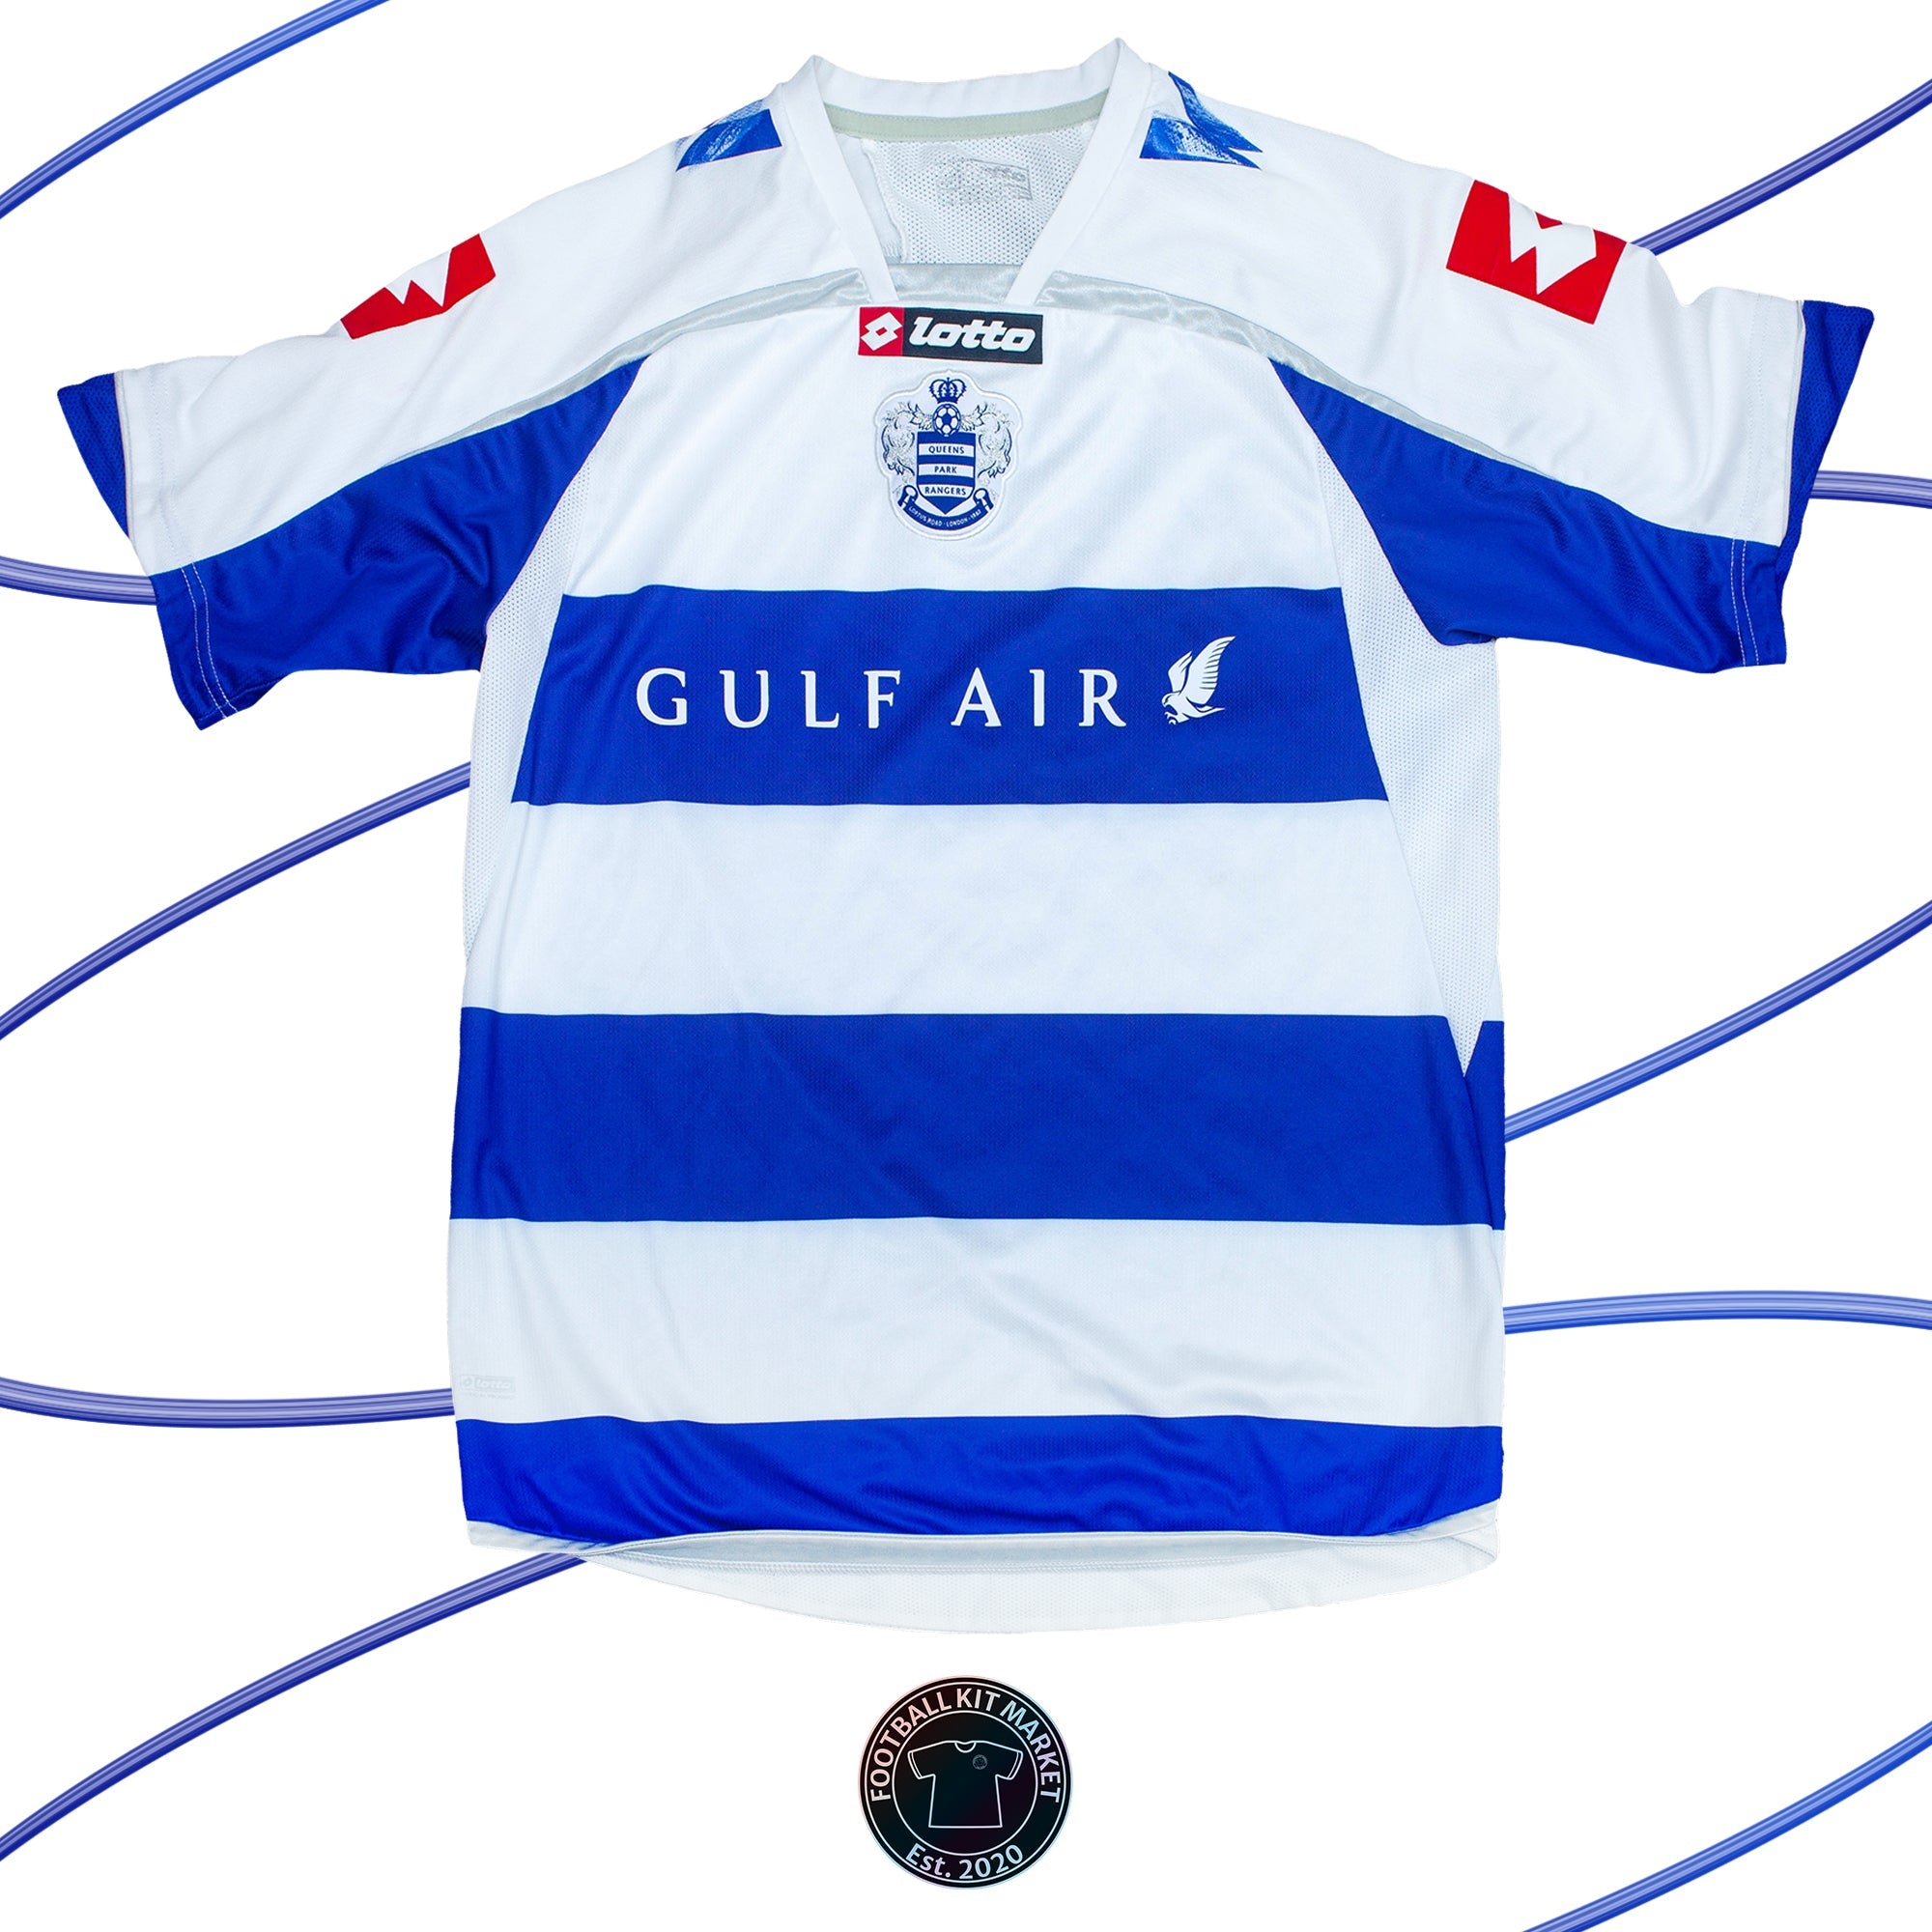 Genuine QUEENS PARK RANGERS Home Shirt (2009-2010) - LOTTO (L) - Product Image from Football Kit Market